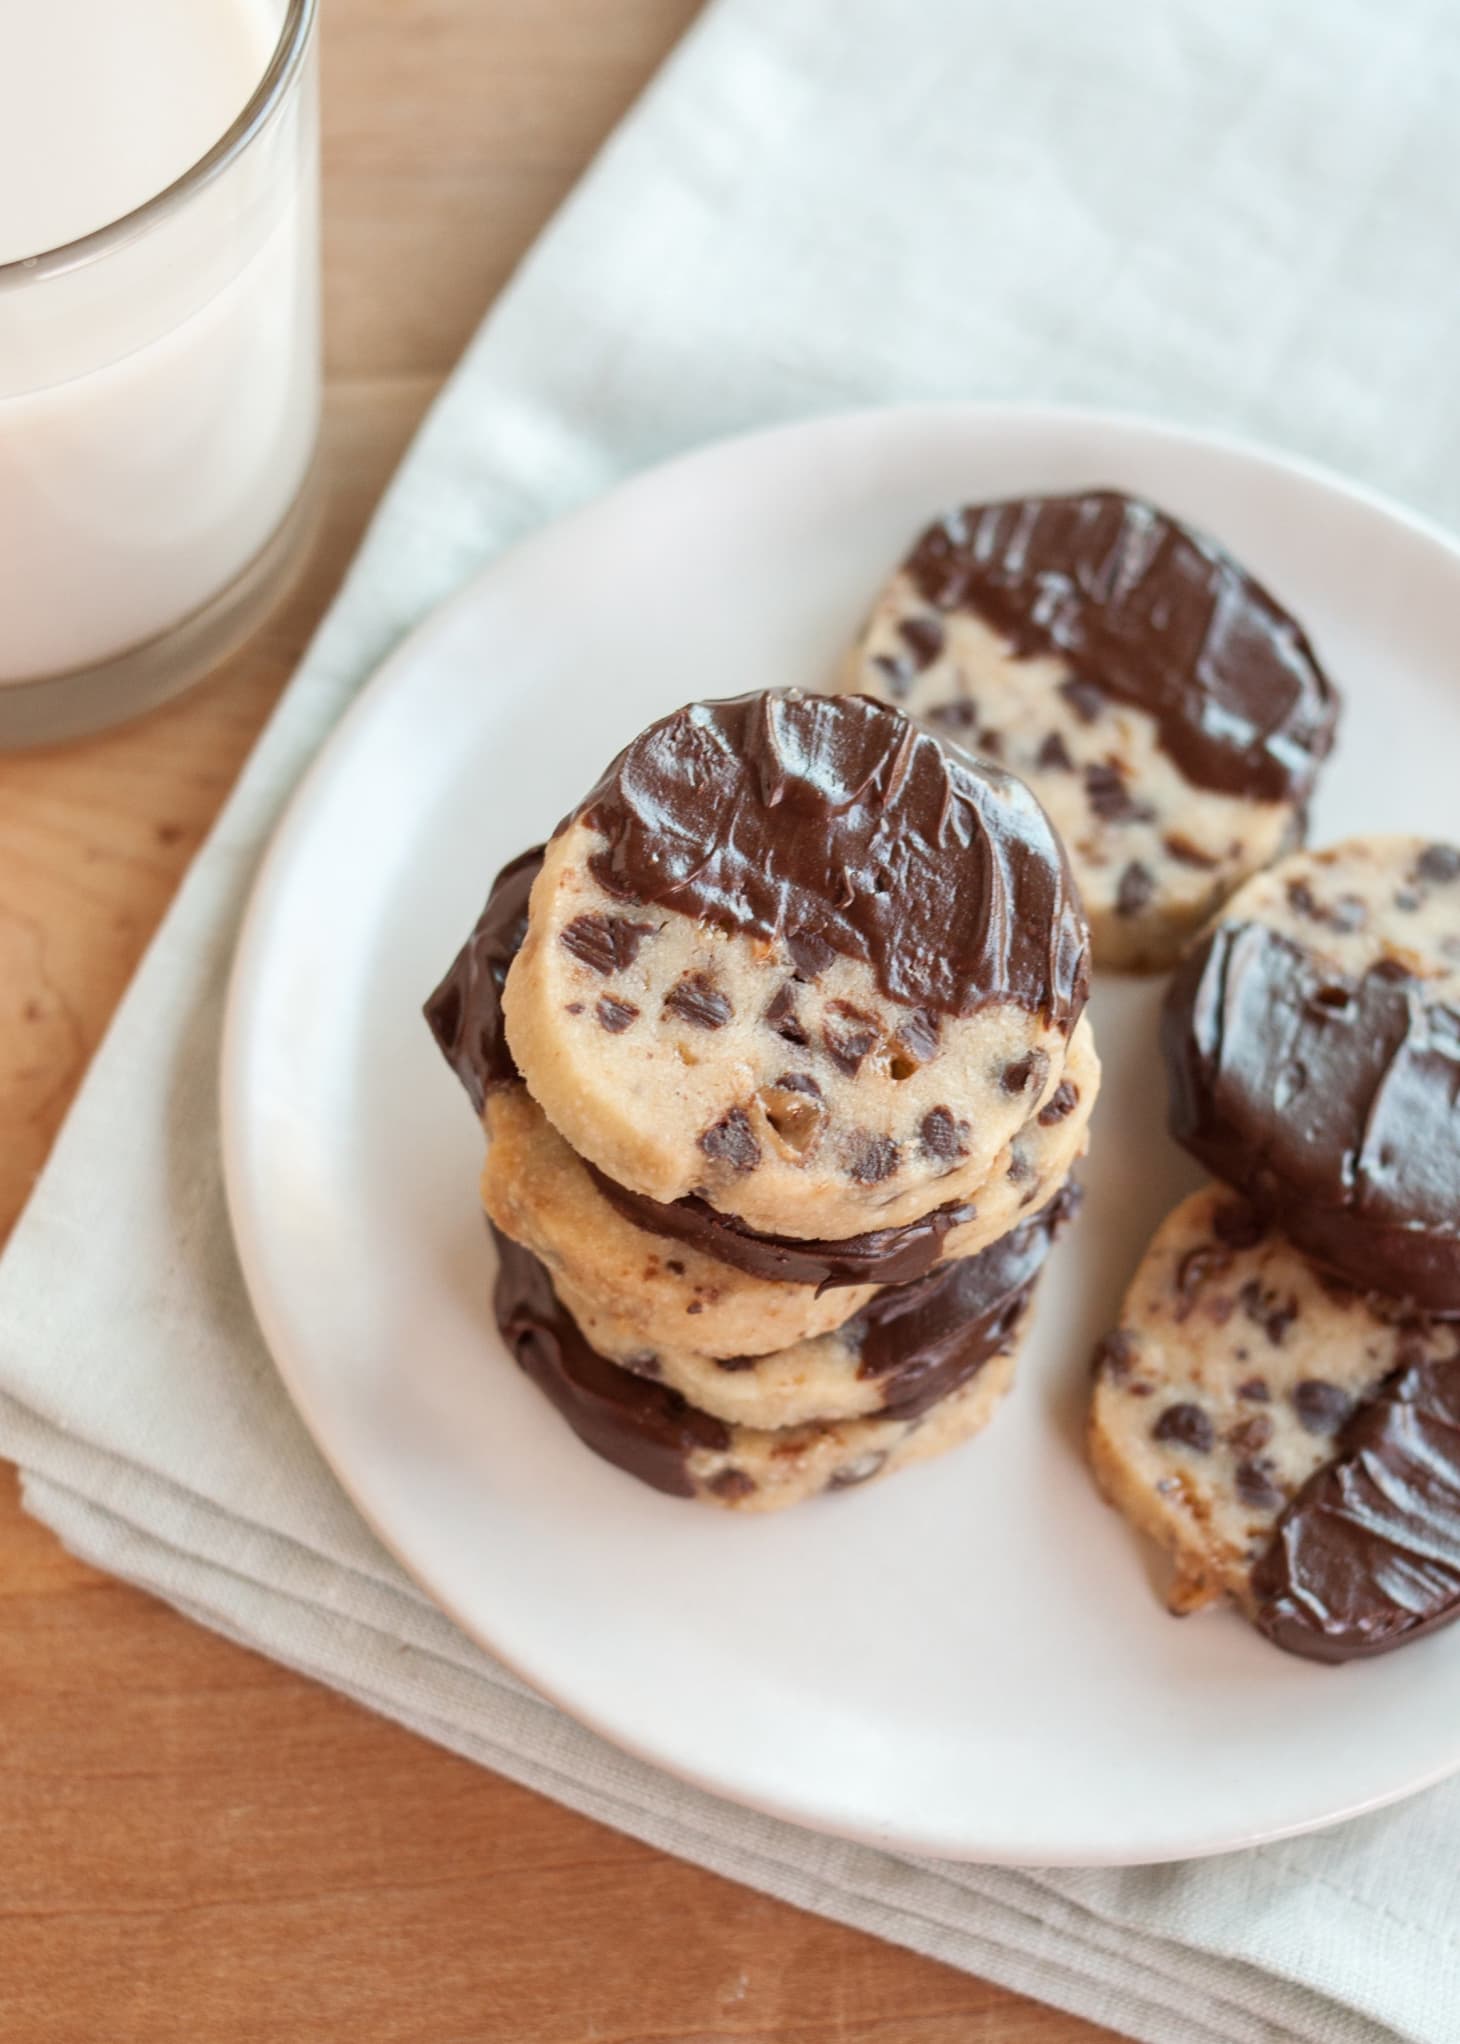 Chocolate Chip and Toffee Shortbread Cookies | Kitchn